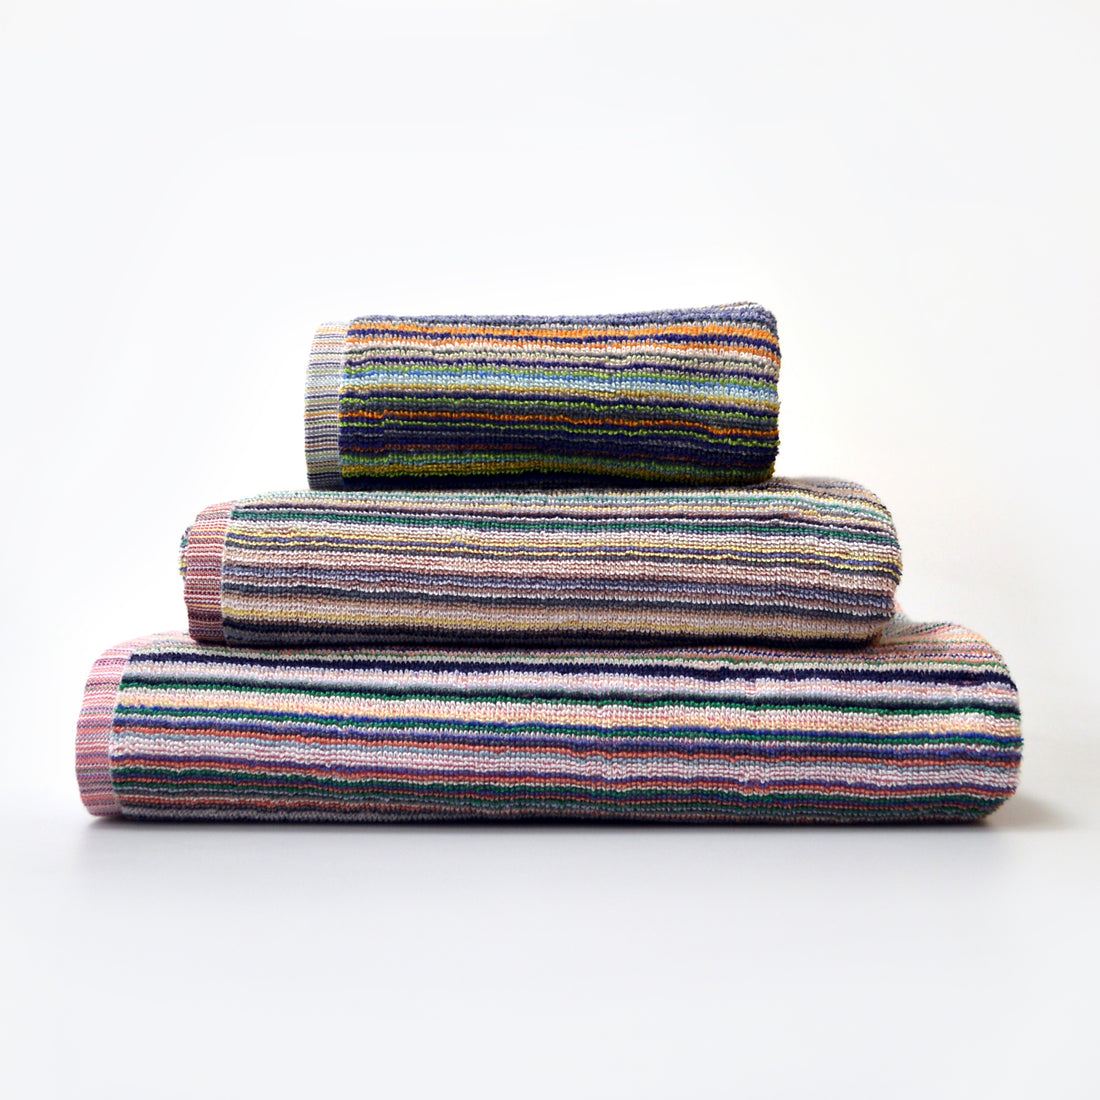 recycled cotton towels made from remnant yarn. Eco friendly, sustainable striped towels